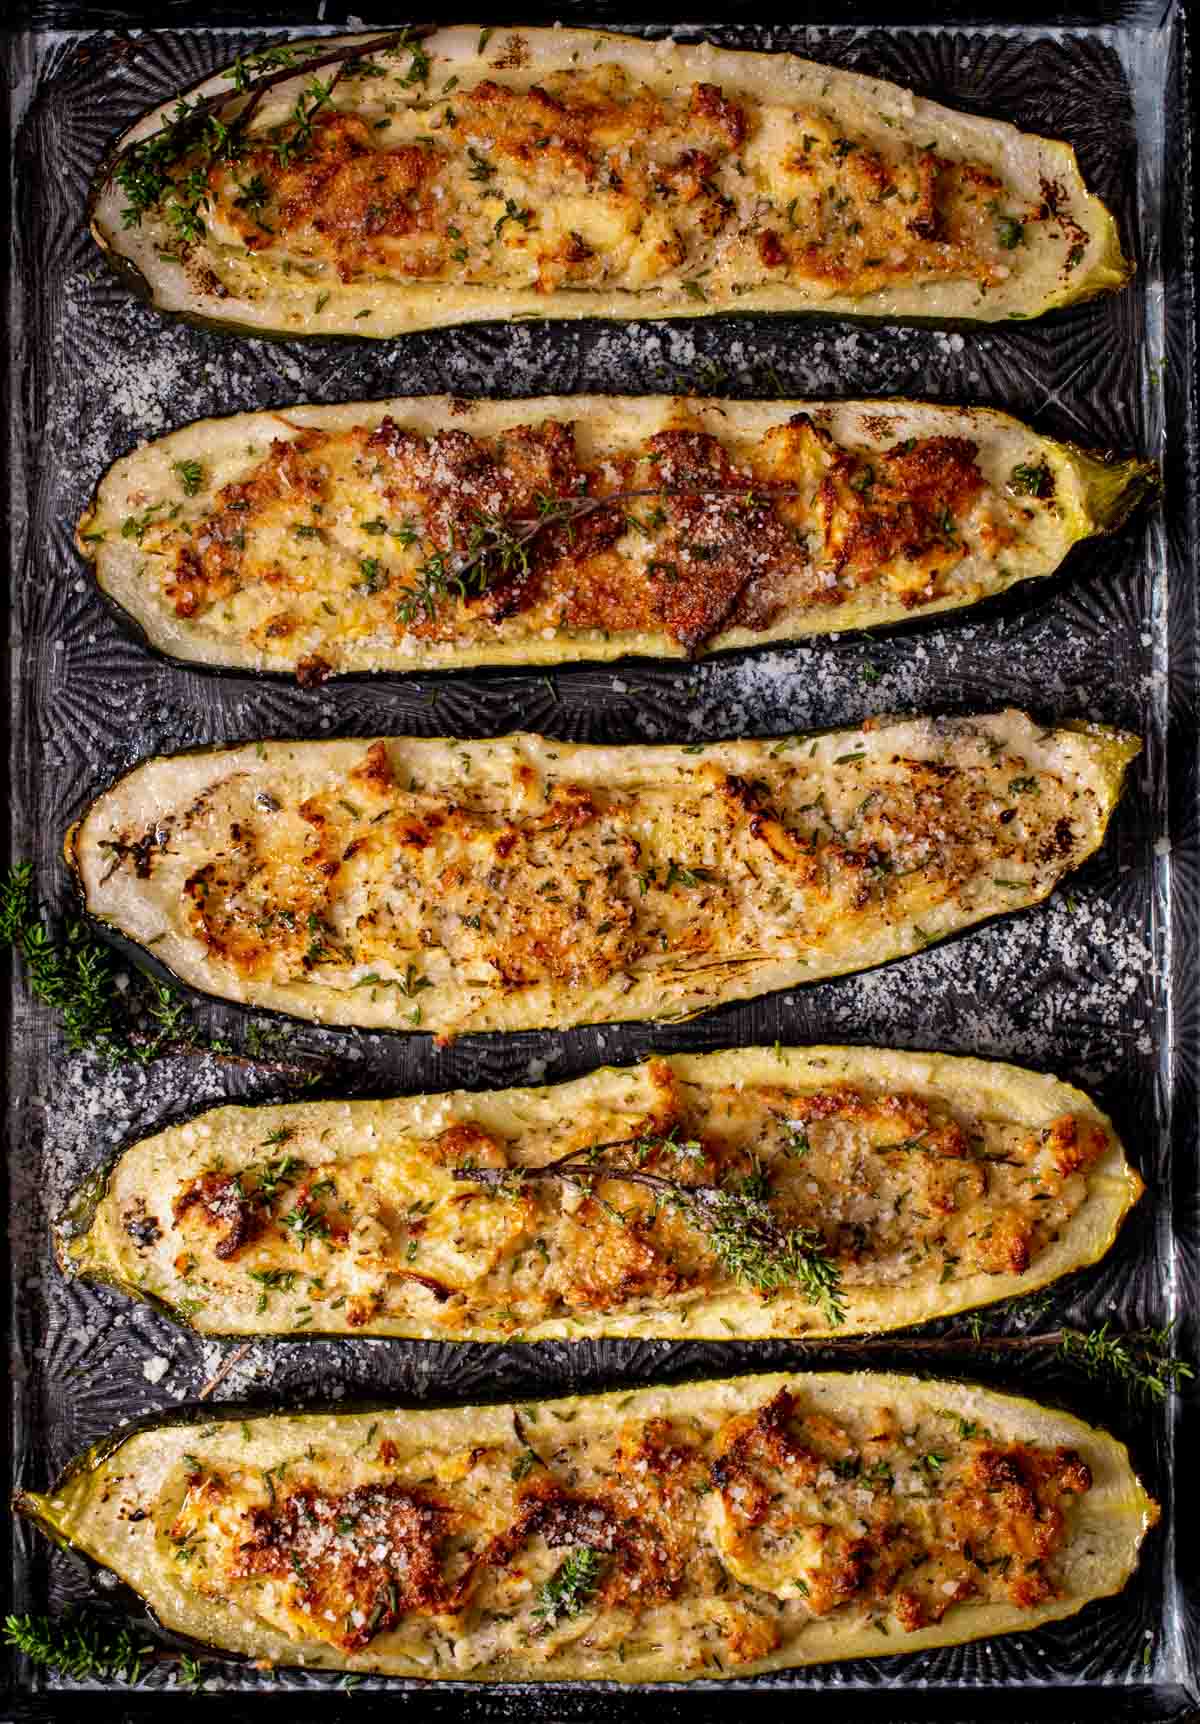 Stuffed courgettes on a baking sheet, sprinkled with thyme.